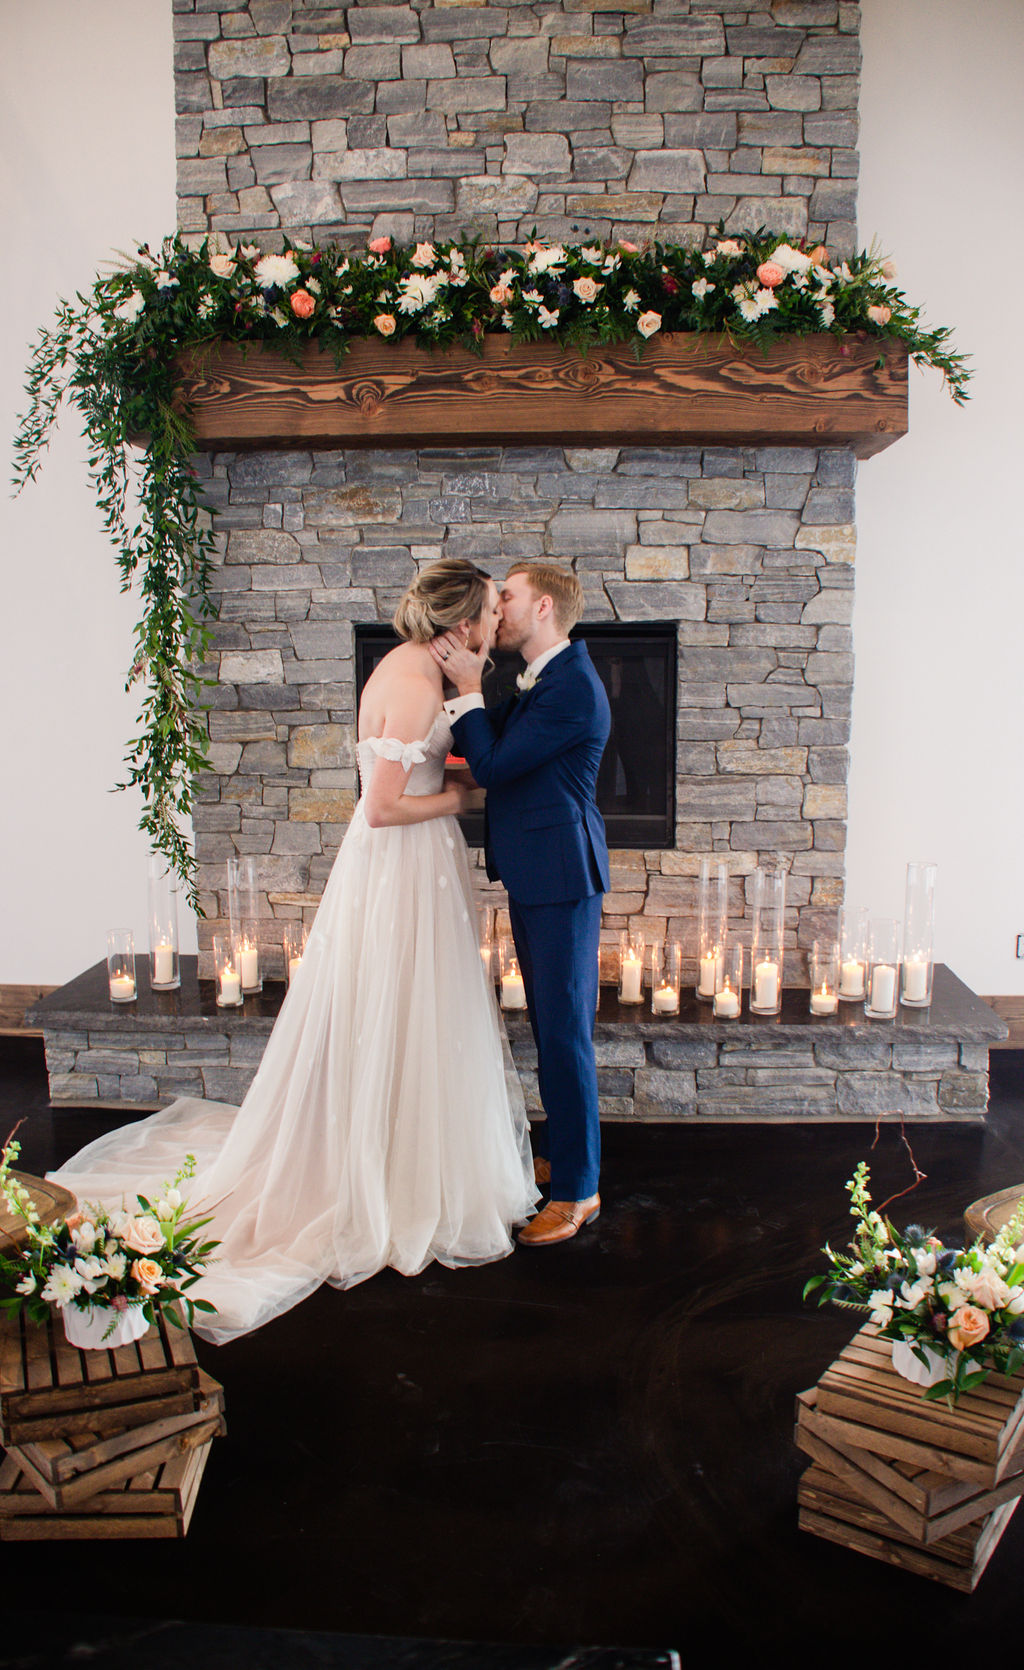 Bride and Groom kissing in front of elegant stone fireplace with candles and flowers